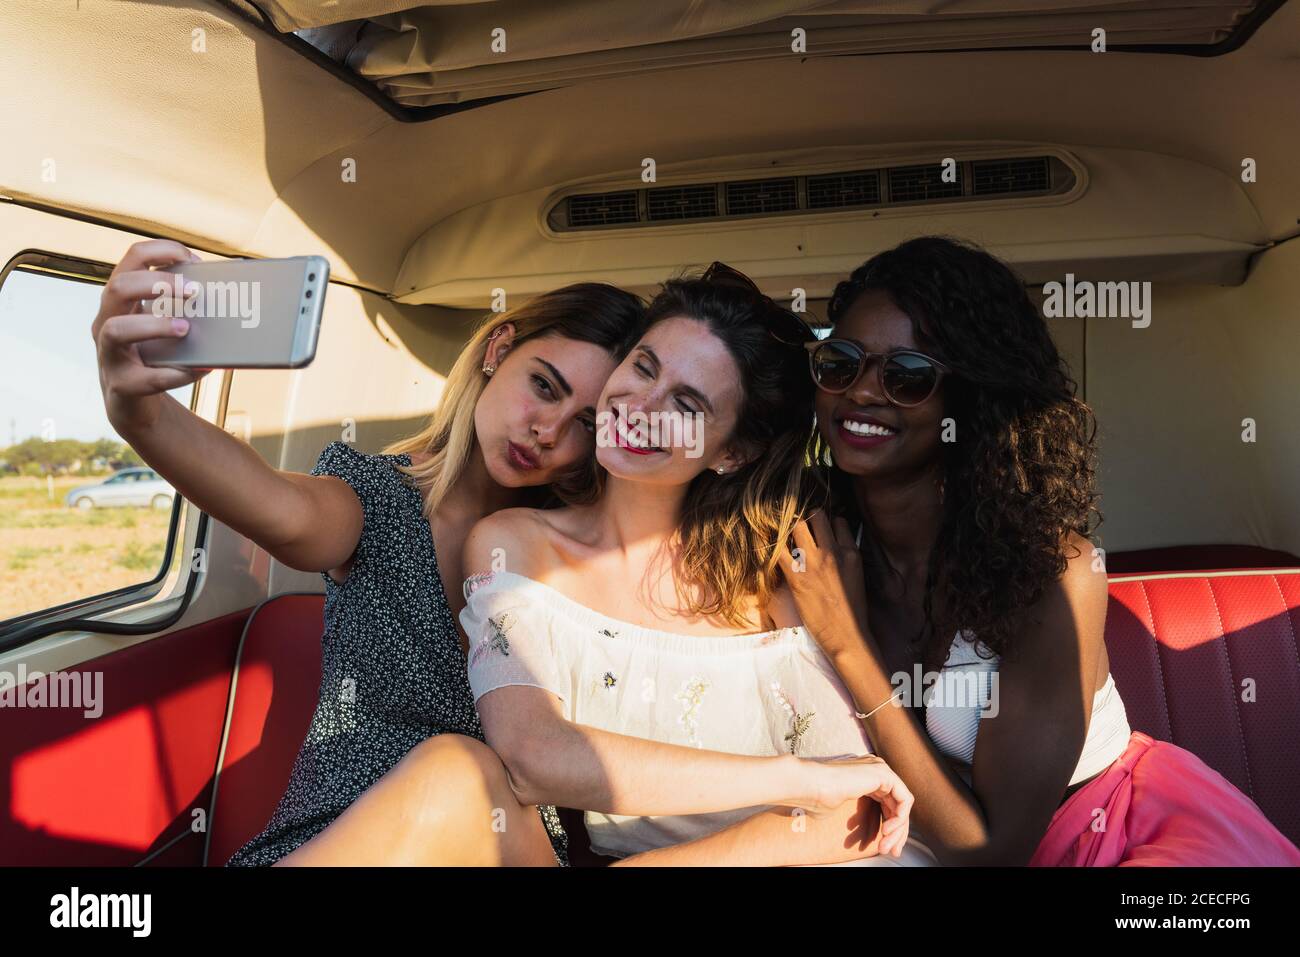 Three cheerful young women sitting inside vintage van and posing for selfie while traveling together Stock Photo